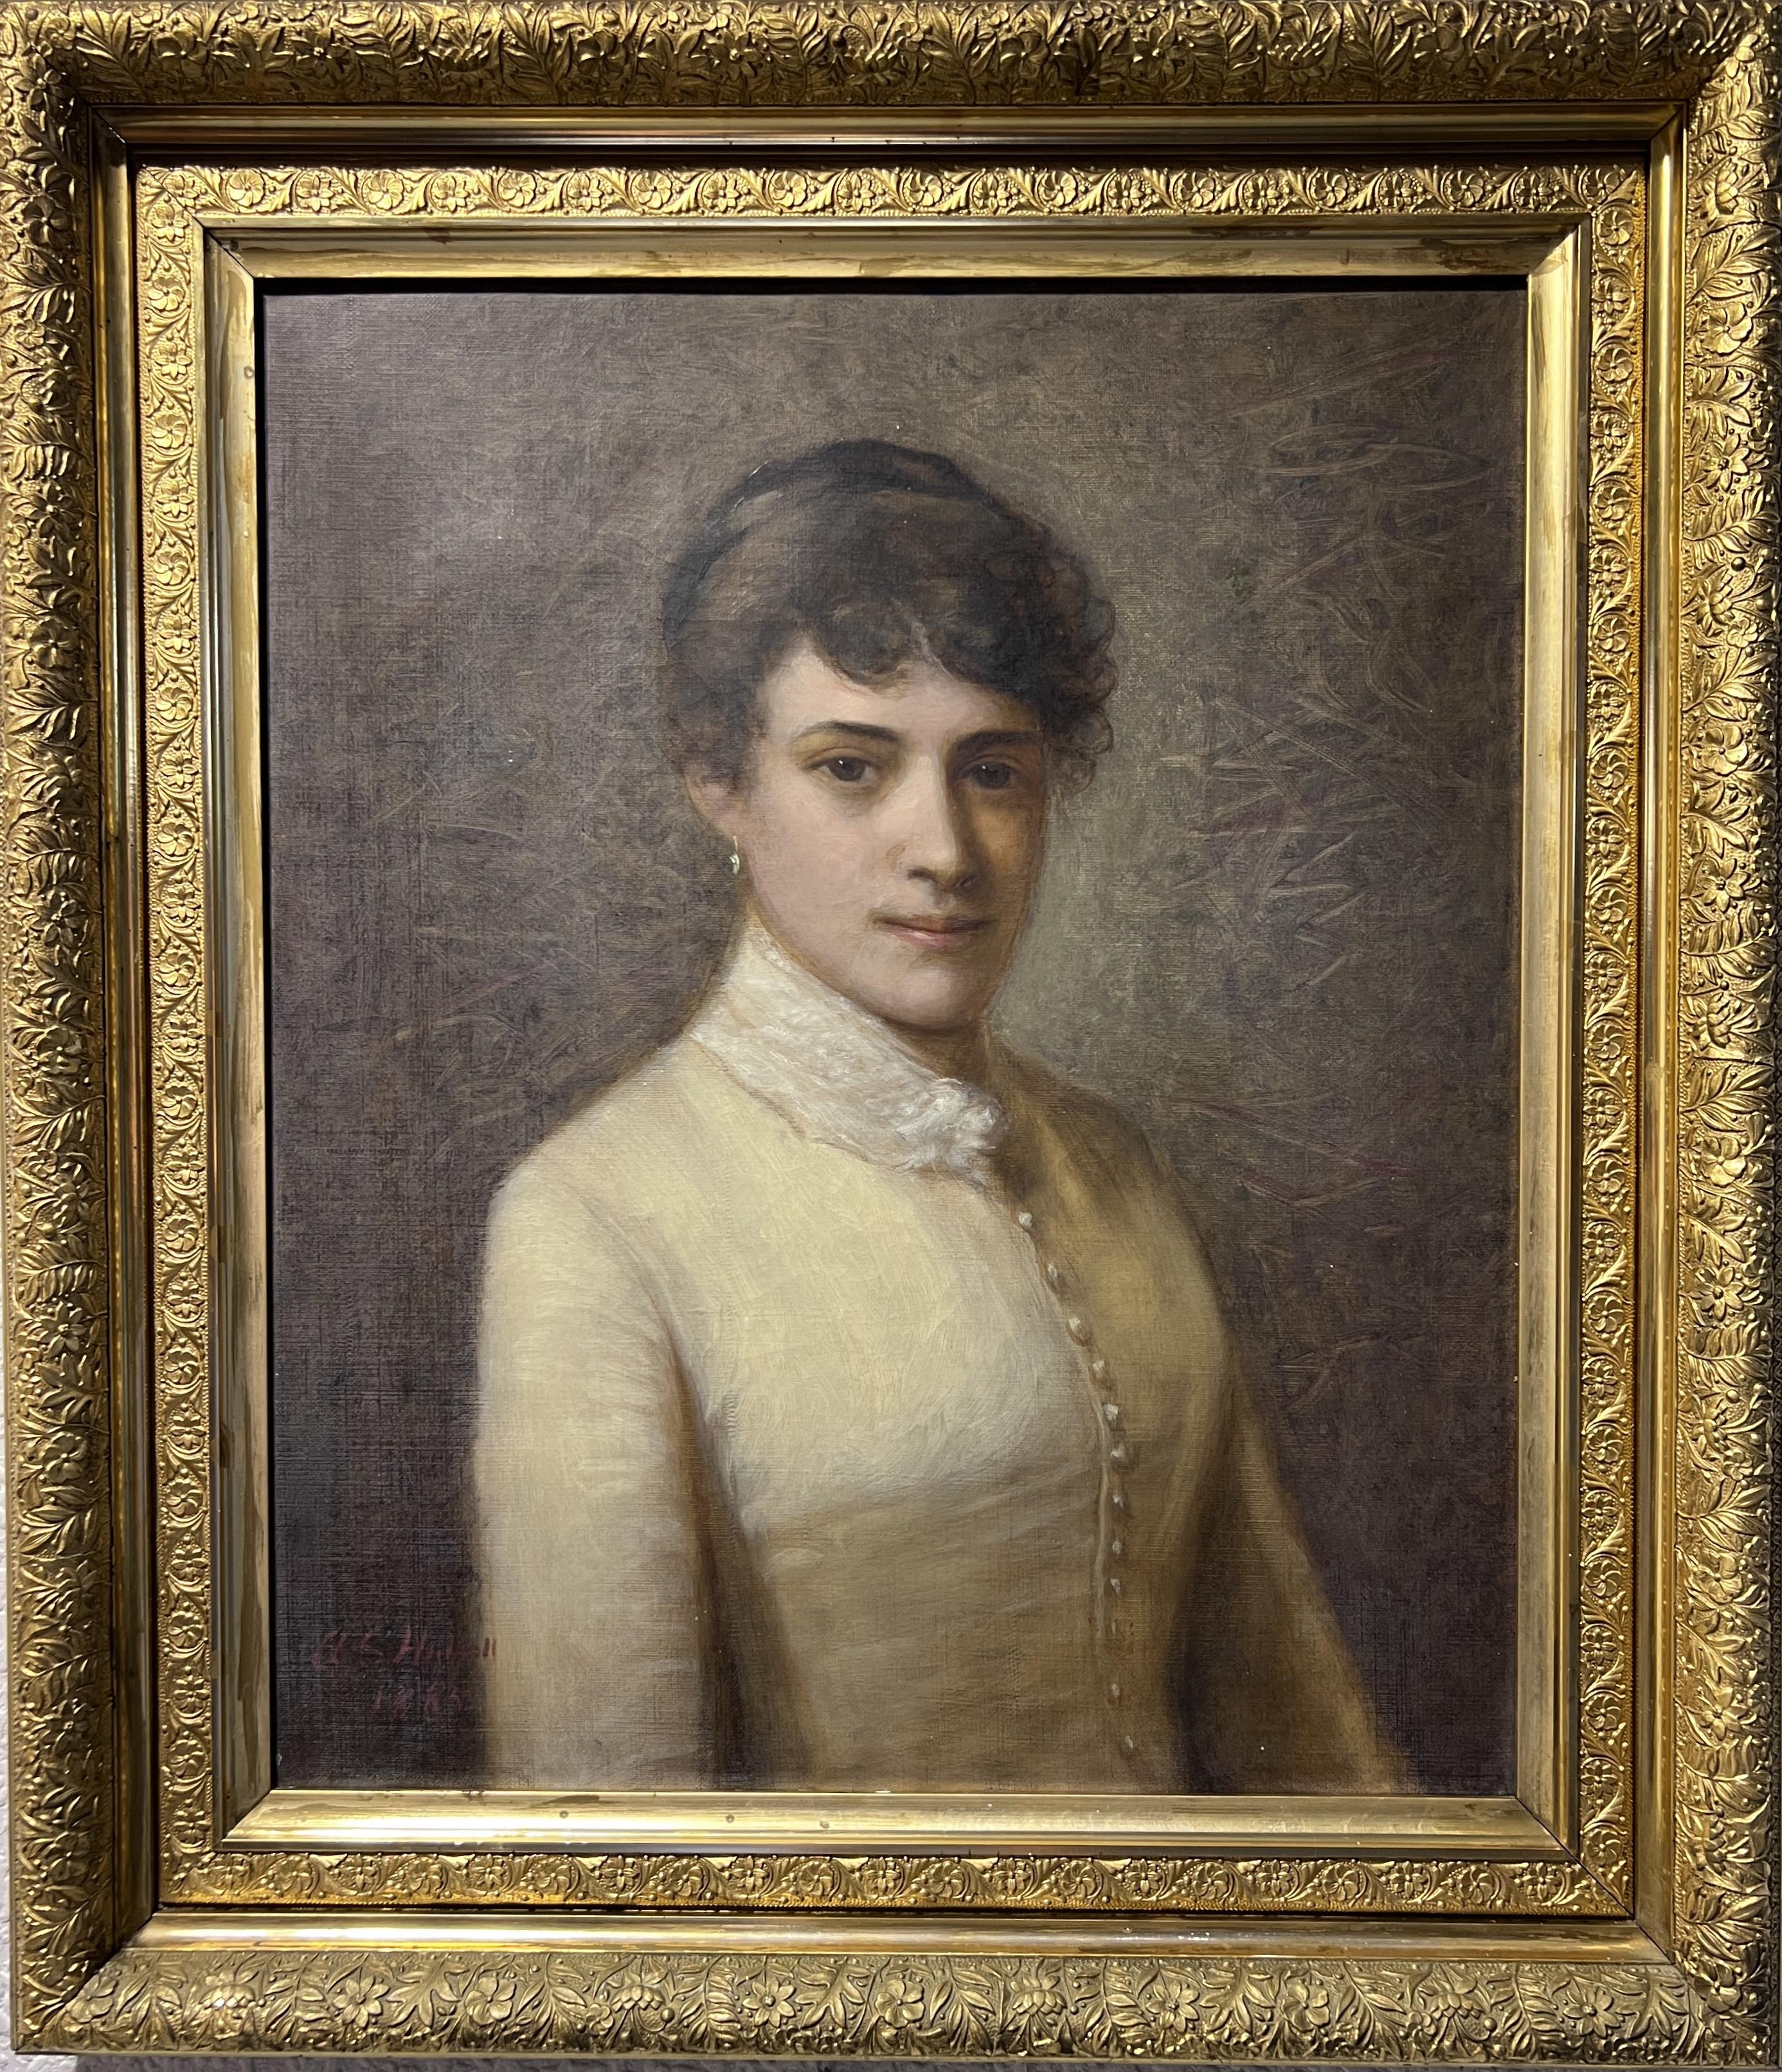 Unknown Portrait Painting - 1885 Signed Antique 19th century oil painting on canvas, Portrait of a Lady